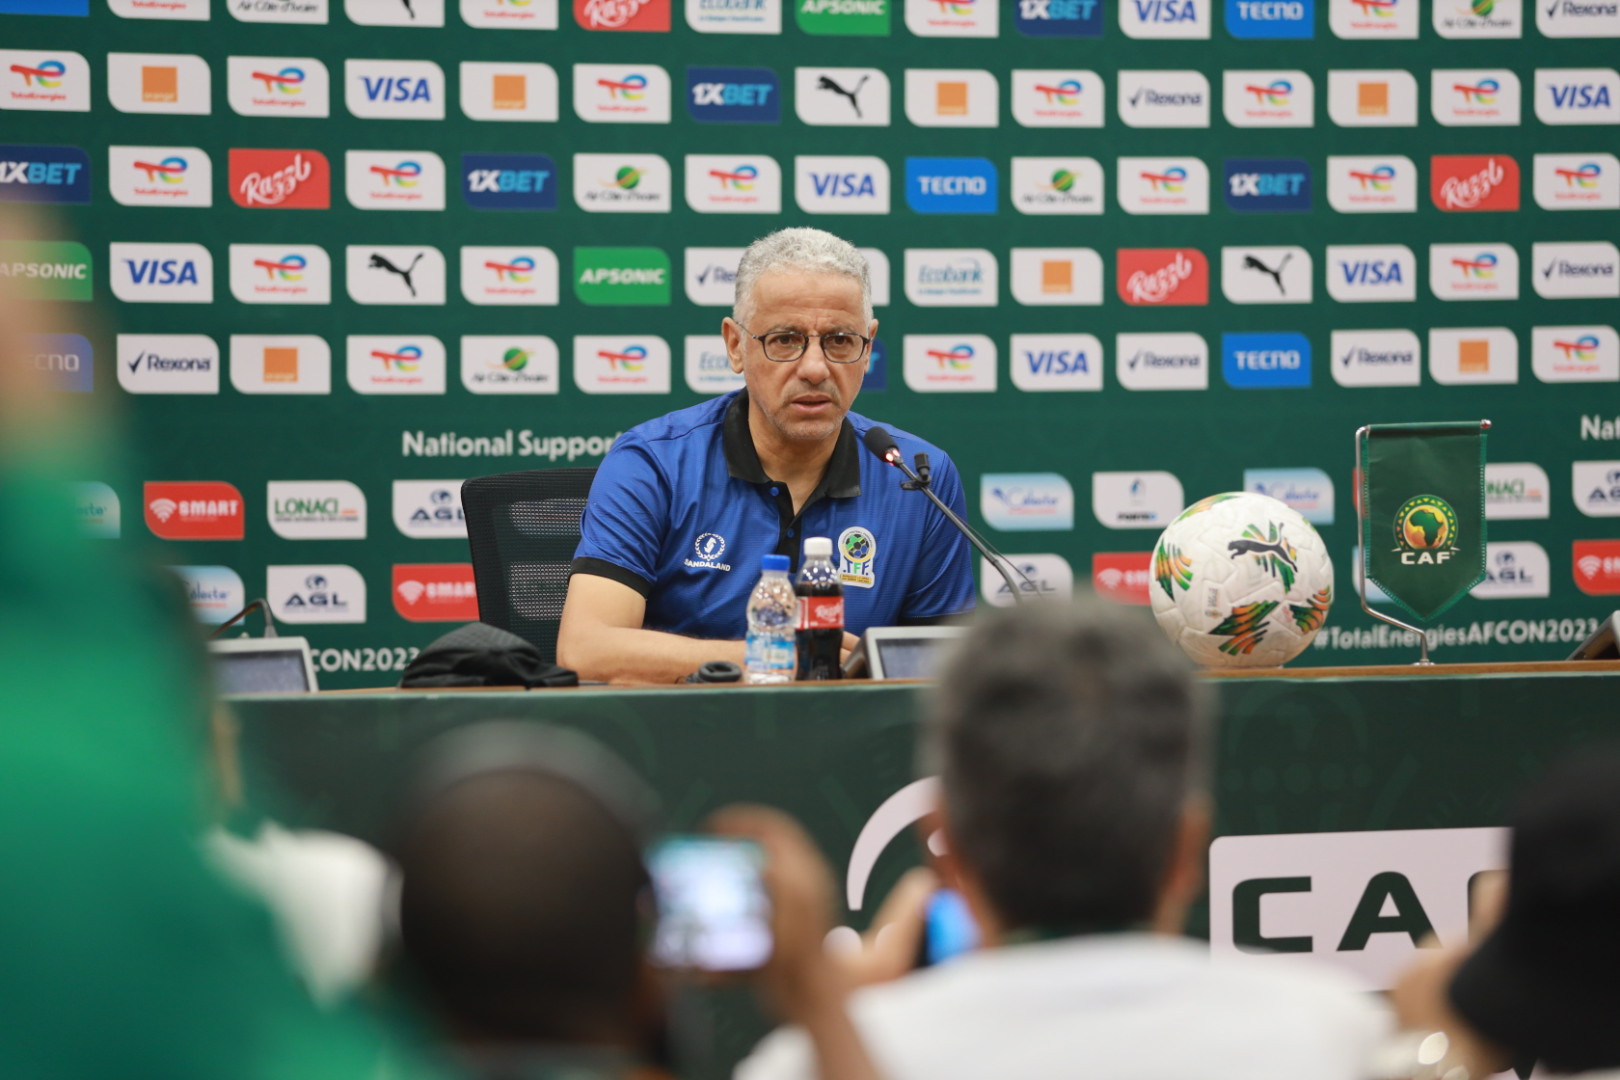 tanzanian coach to appear before caf disciplinary committee for remarks against moroccan federation